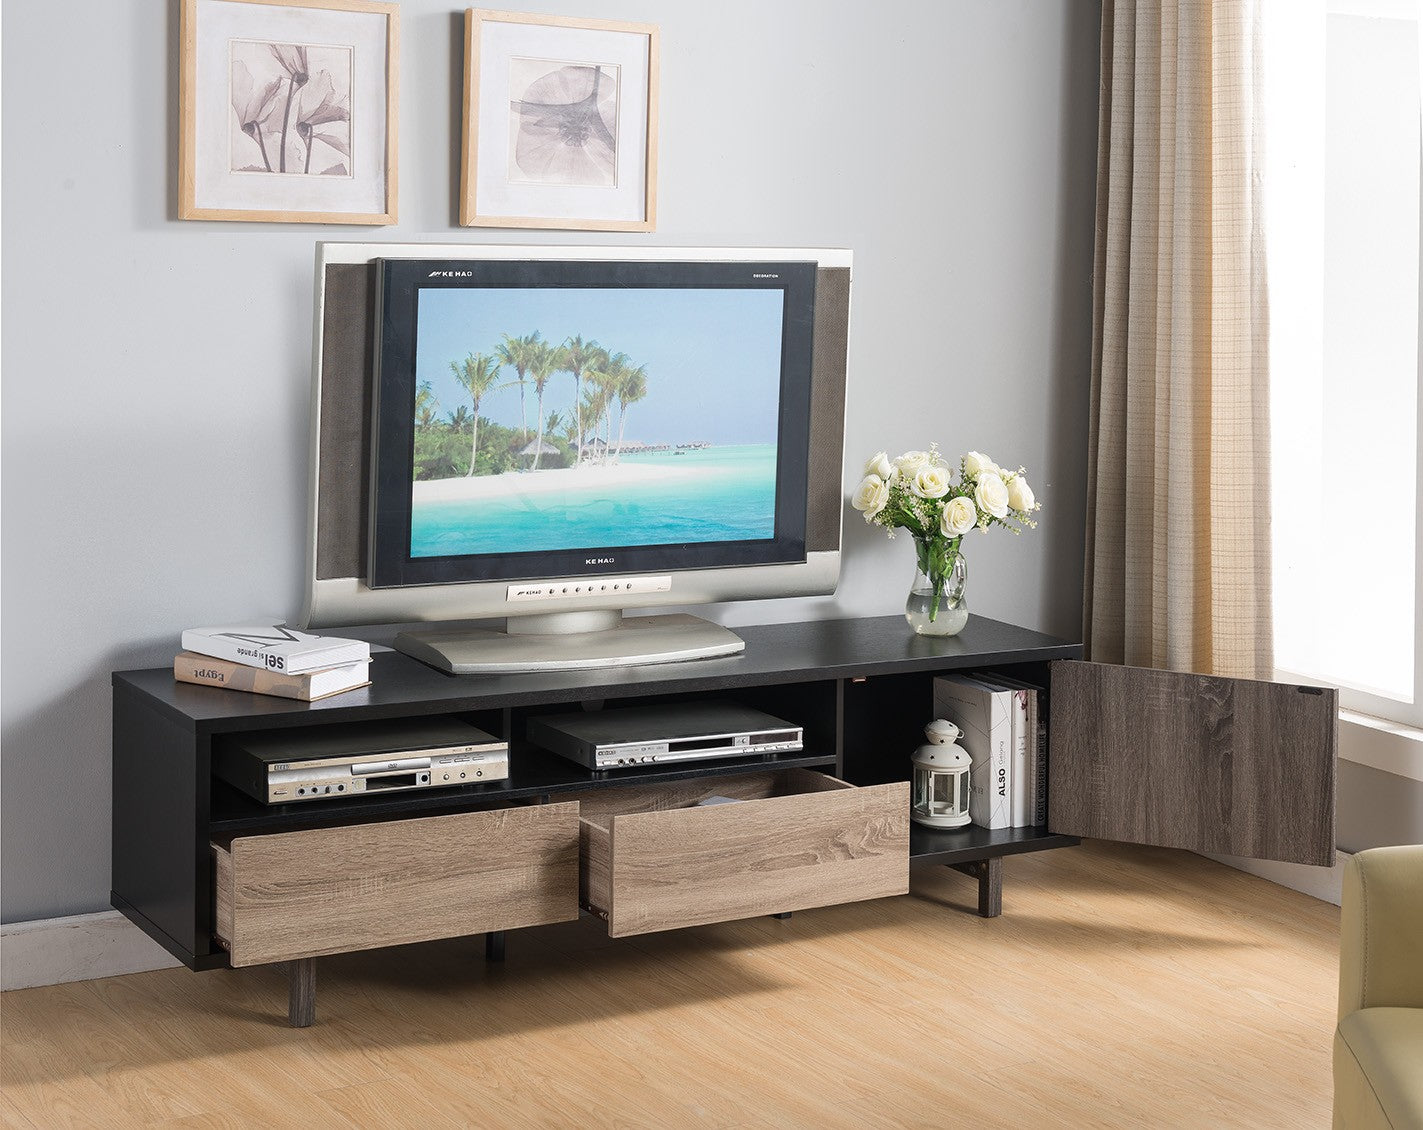 71" Brown And Black Particle Board And Mdf Cabinet Enclosed Storage TV Stand